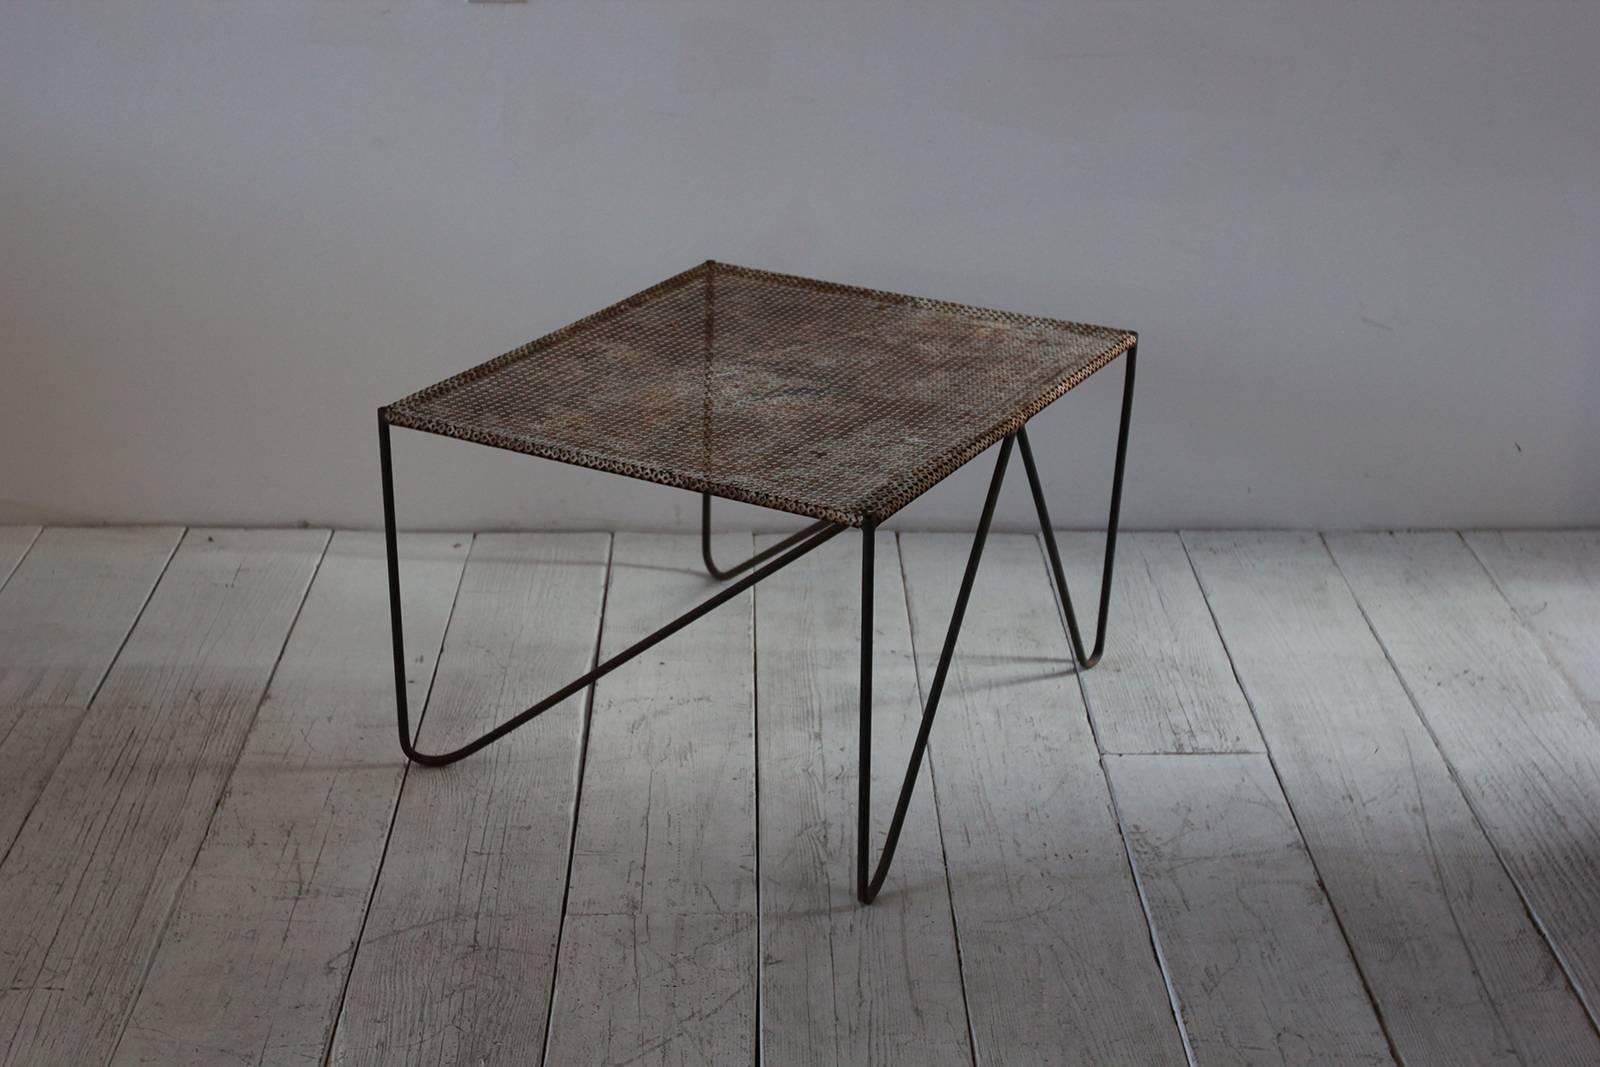 Rustic Perforated Metal Side Table with Angled Legs 2